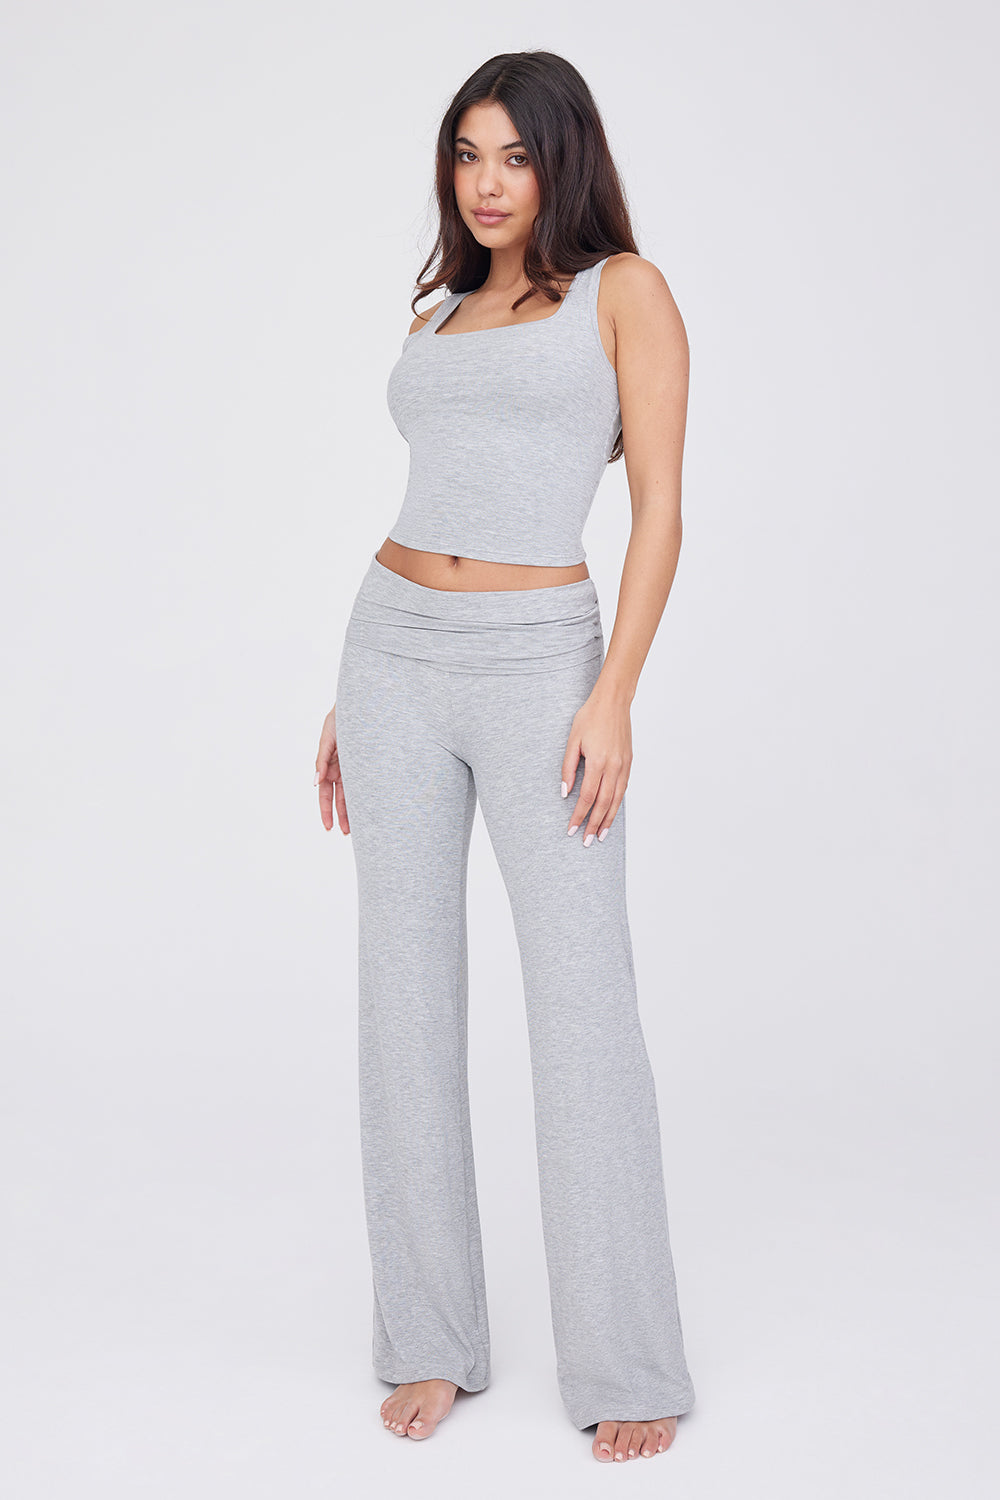 Grey Marl Cotton Fold Over Waist Flare Trousers